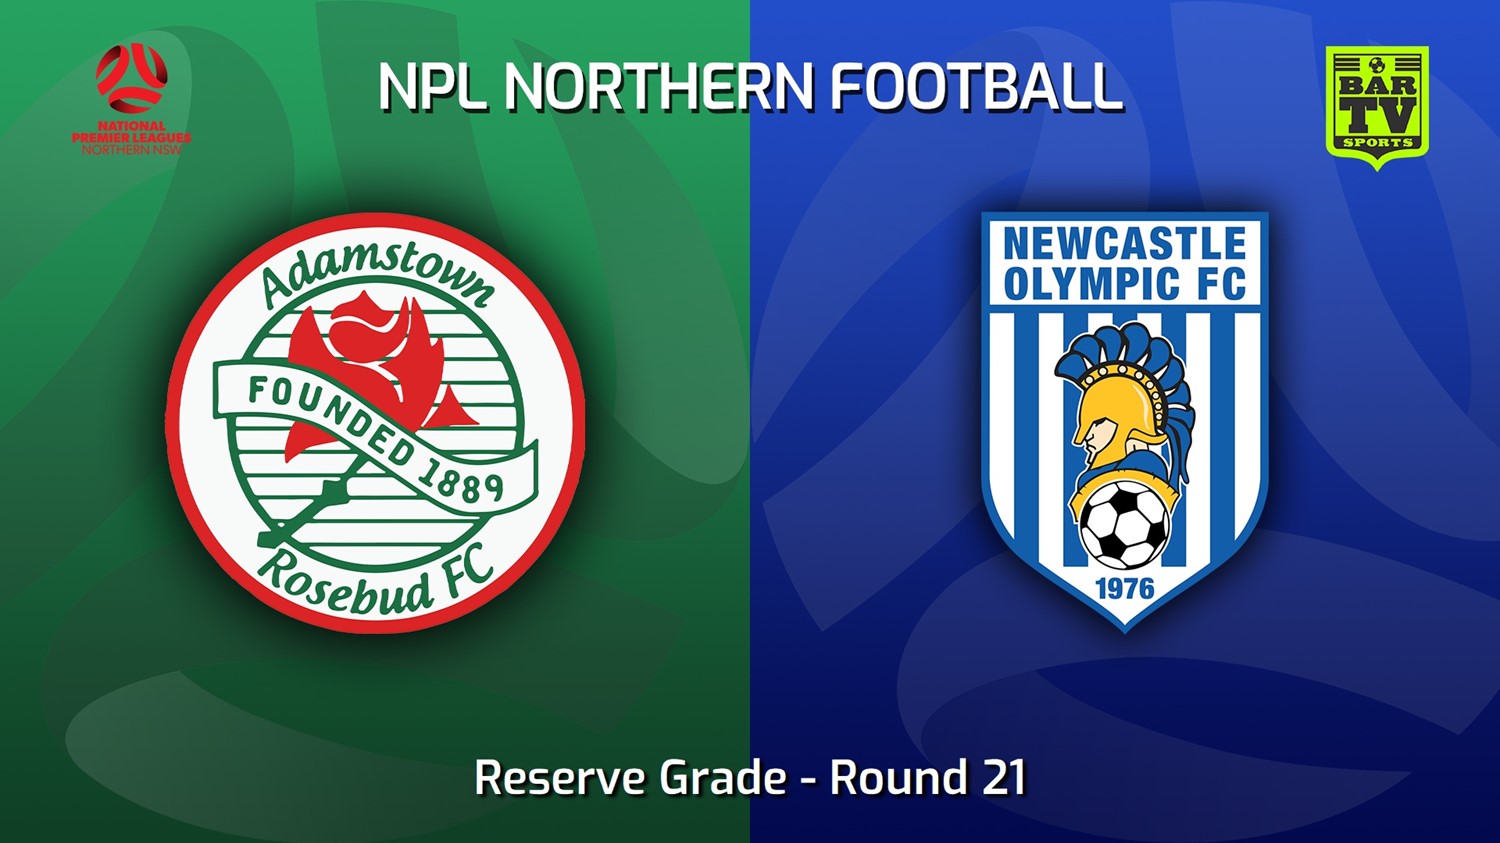 220806-NNSW NPLM Res Round 21 - Adamstown Rosebud FC Res v Newcastle Olympic Res Minigame Slate Image